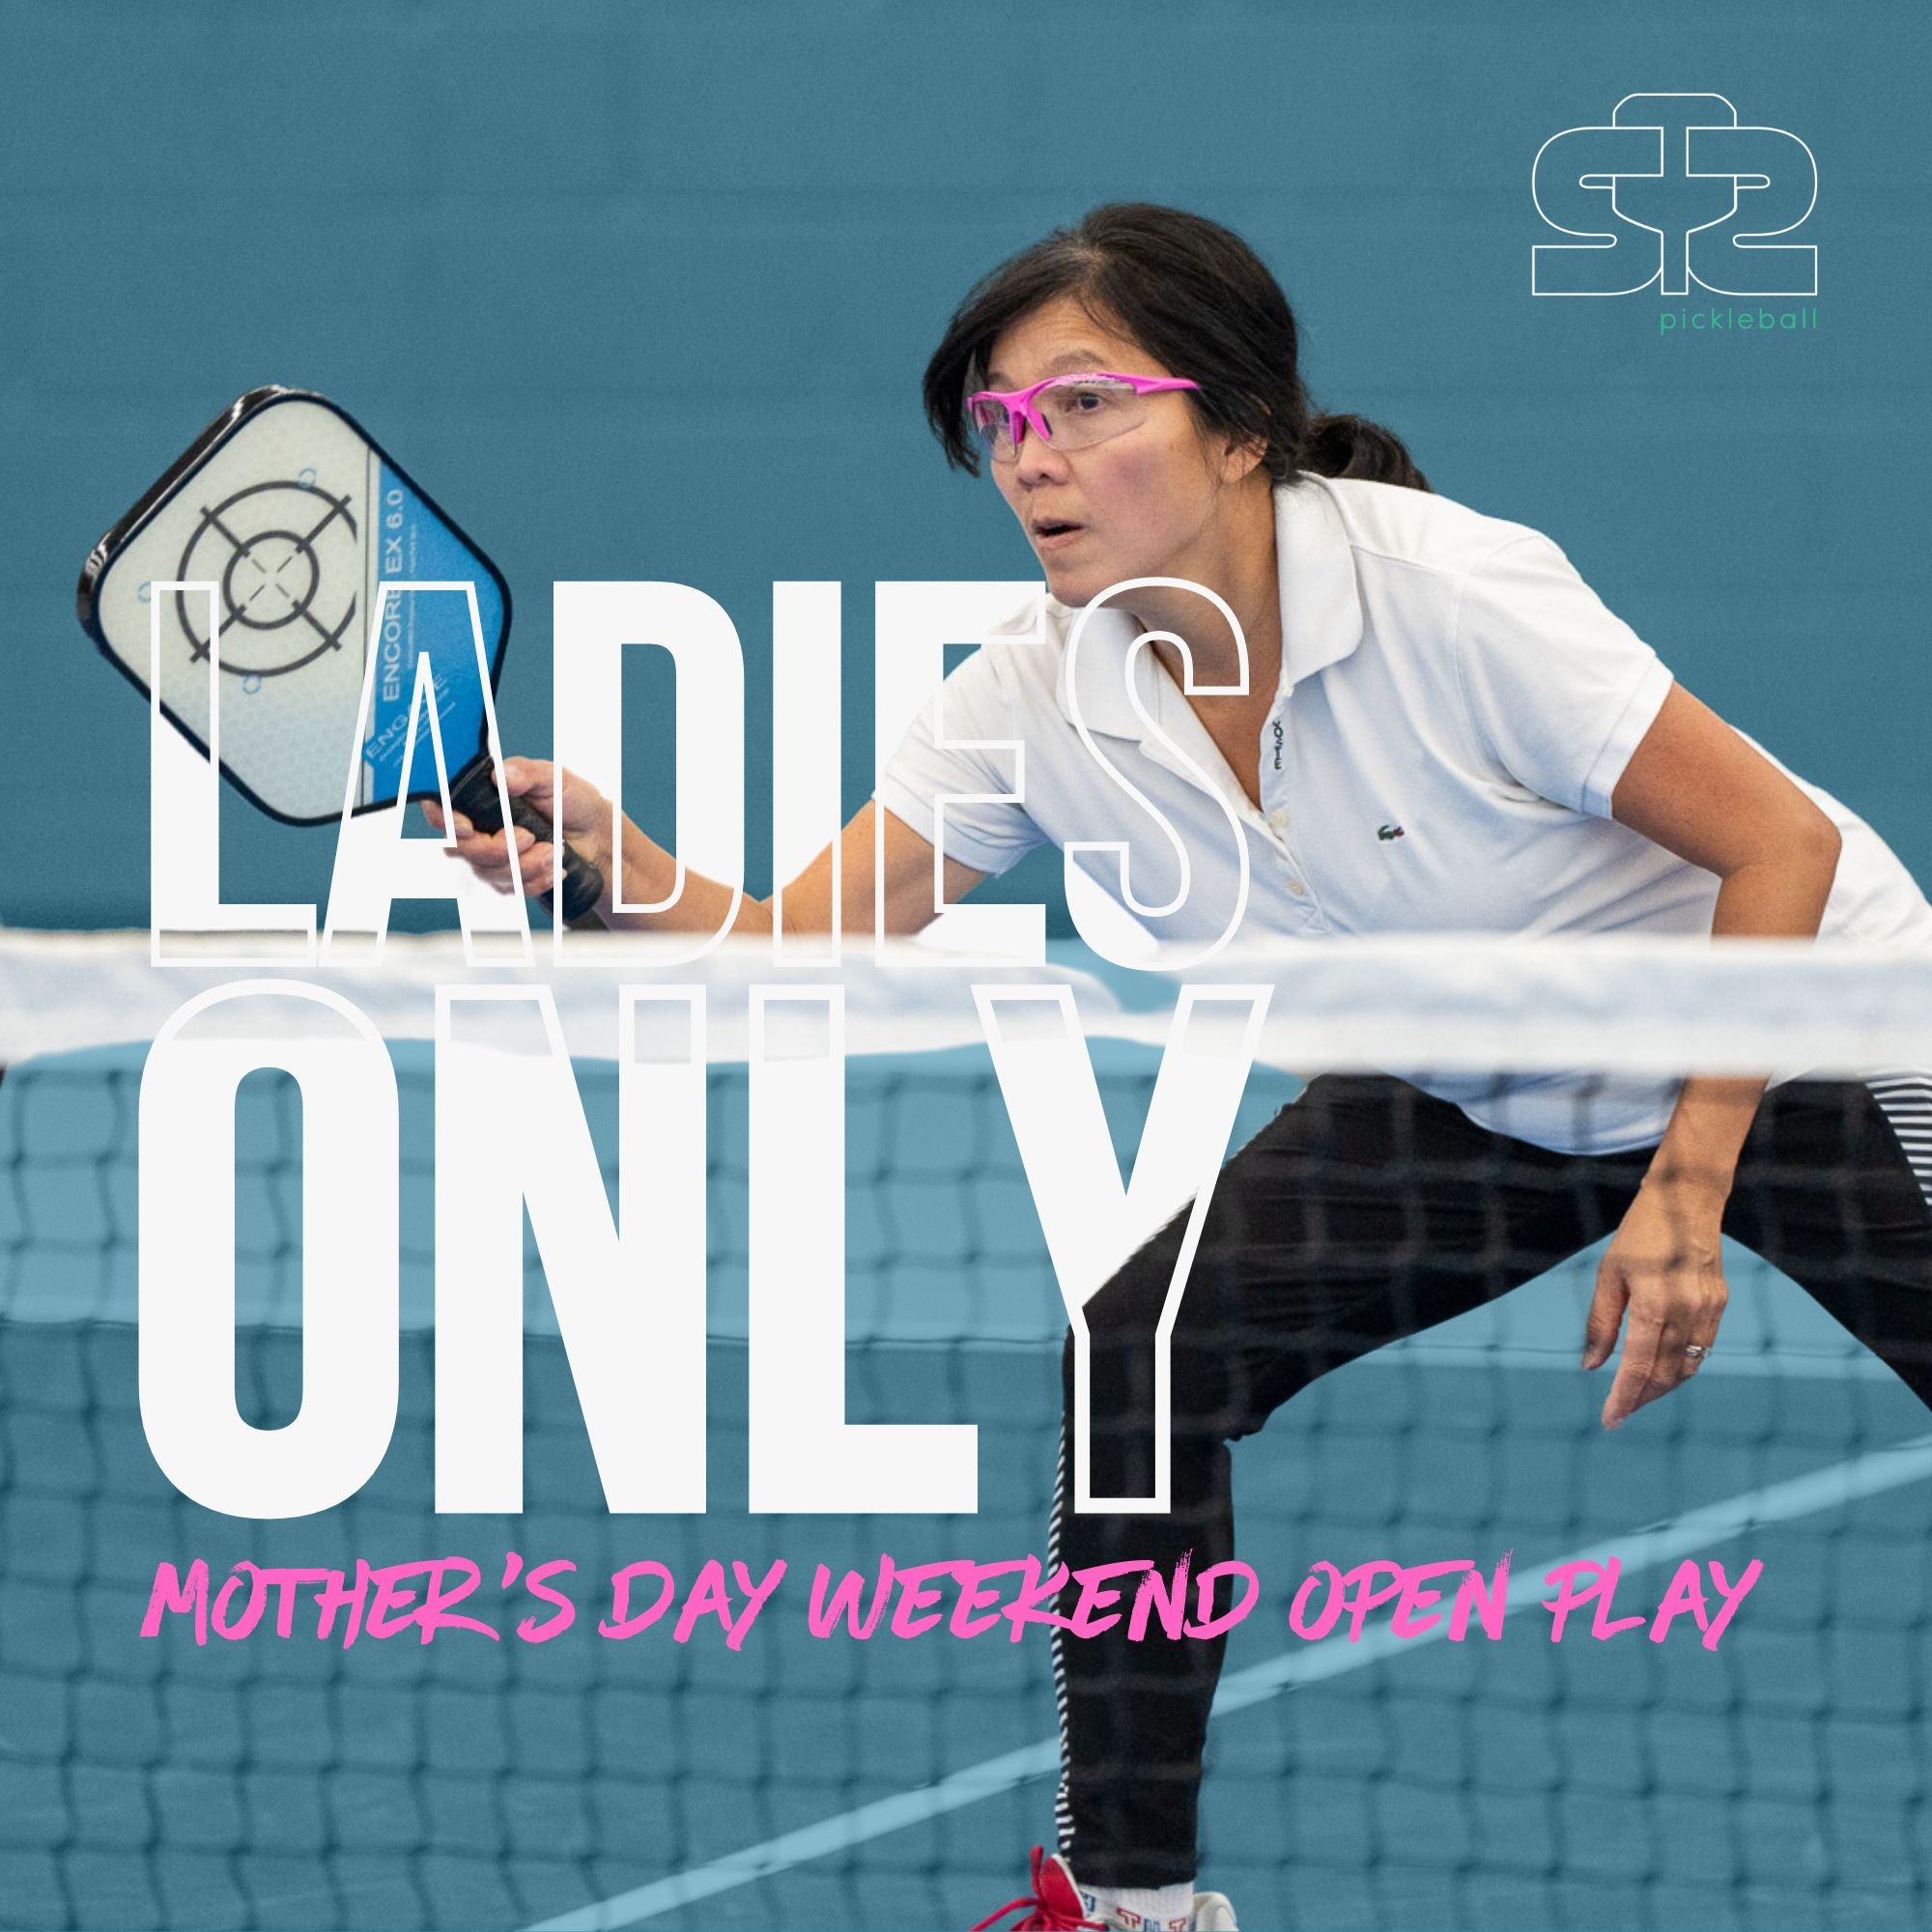 Save the Date! Join us for a special Ladies-Only open play to celebrate all the lovely ladies in our pickleball community! Saturday, May 11th at 11 a.m. 
.
Learn more by clicking:
https://s2pickleball.playbypoint.com/programs/The-Pampered-Pickleballe